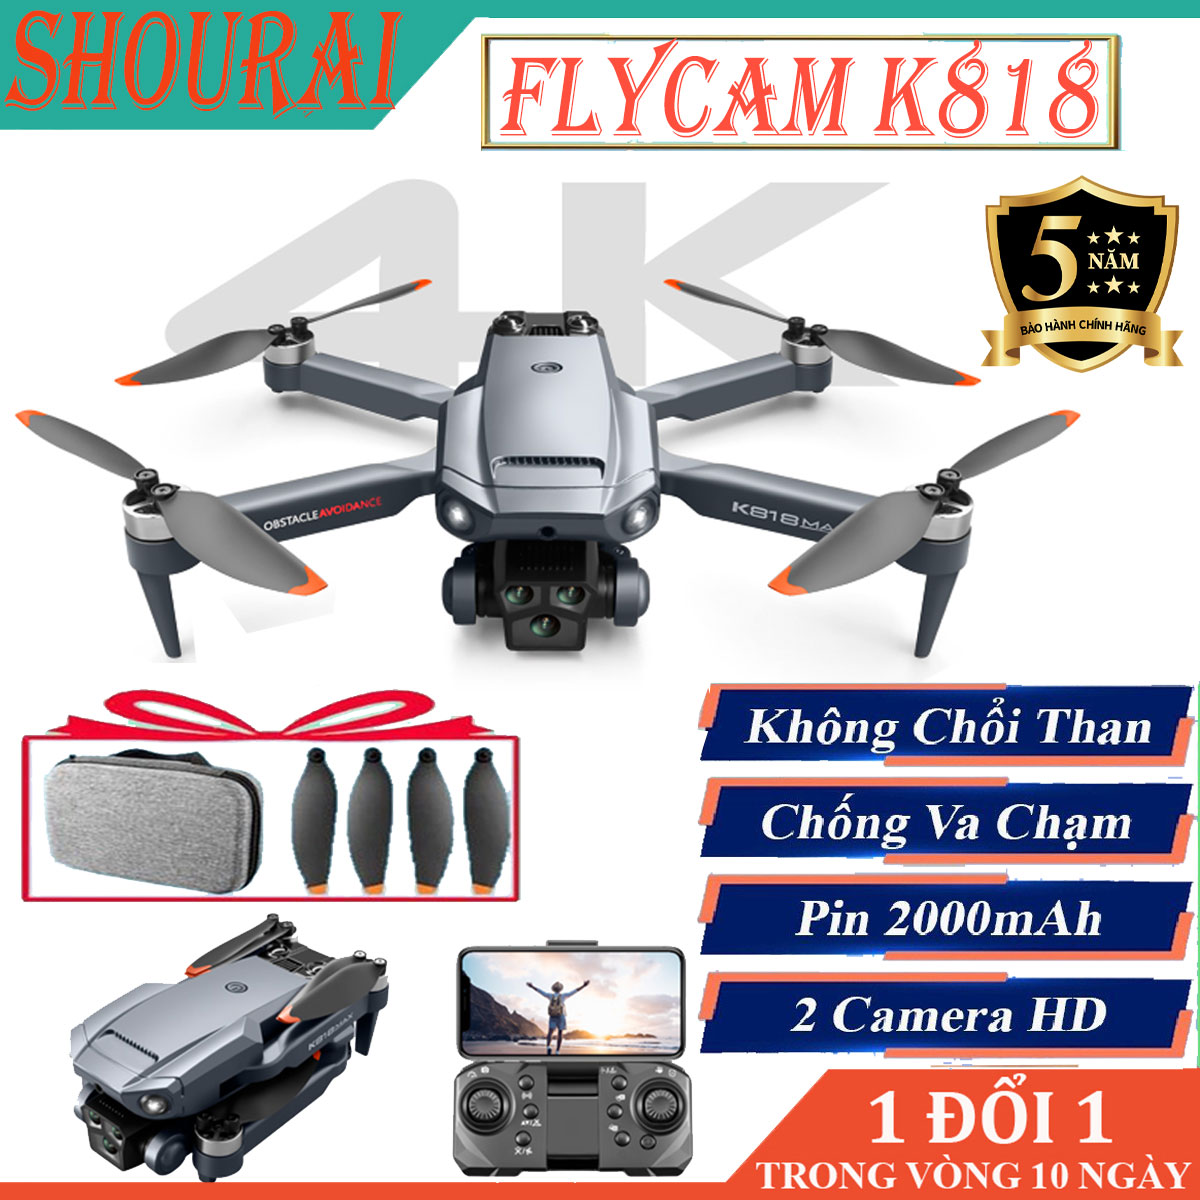 K818 pro, RC quadcopter drone, cheap fly cam, drone